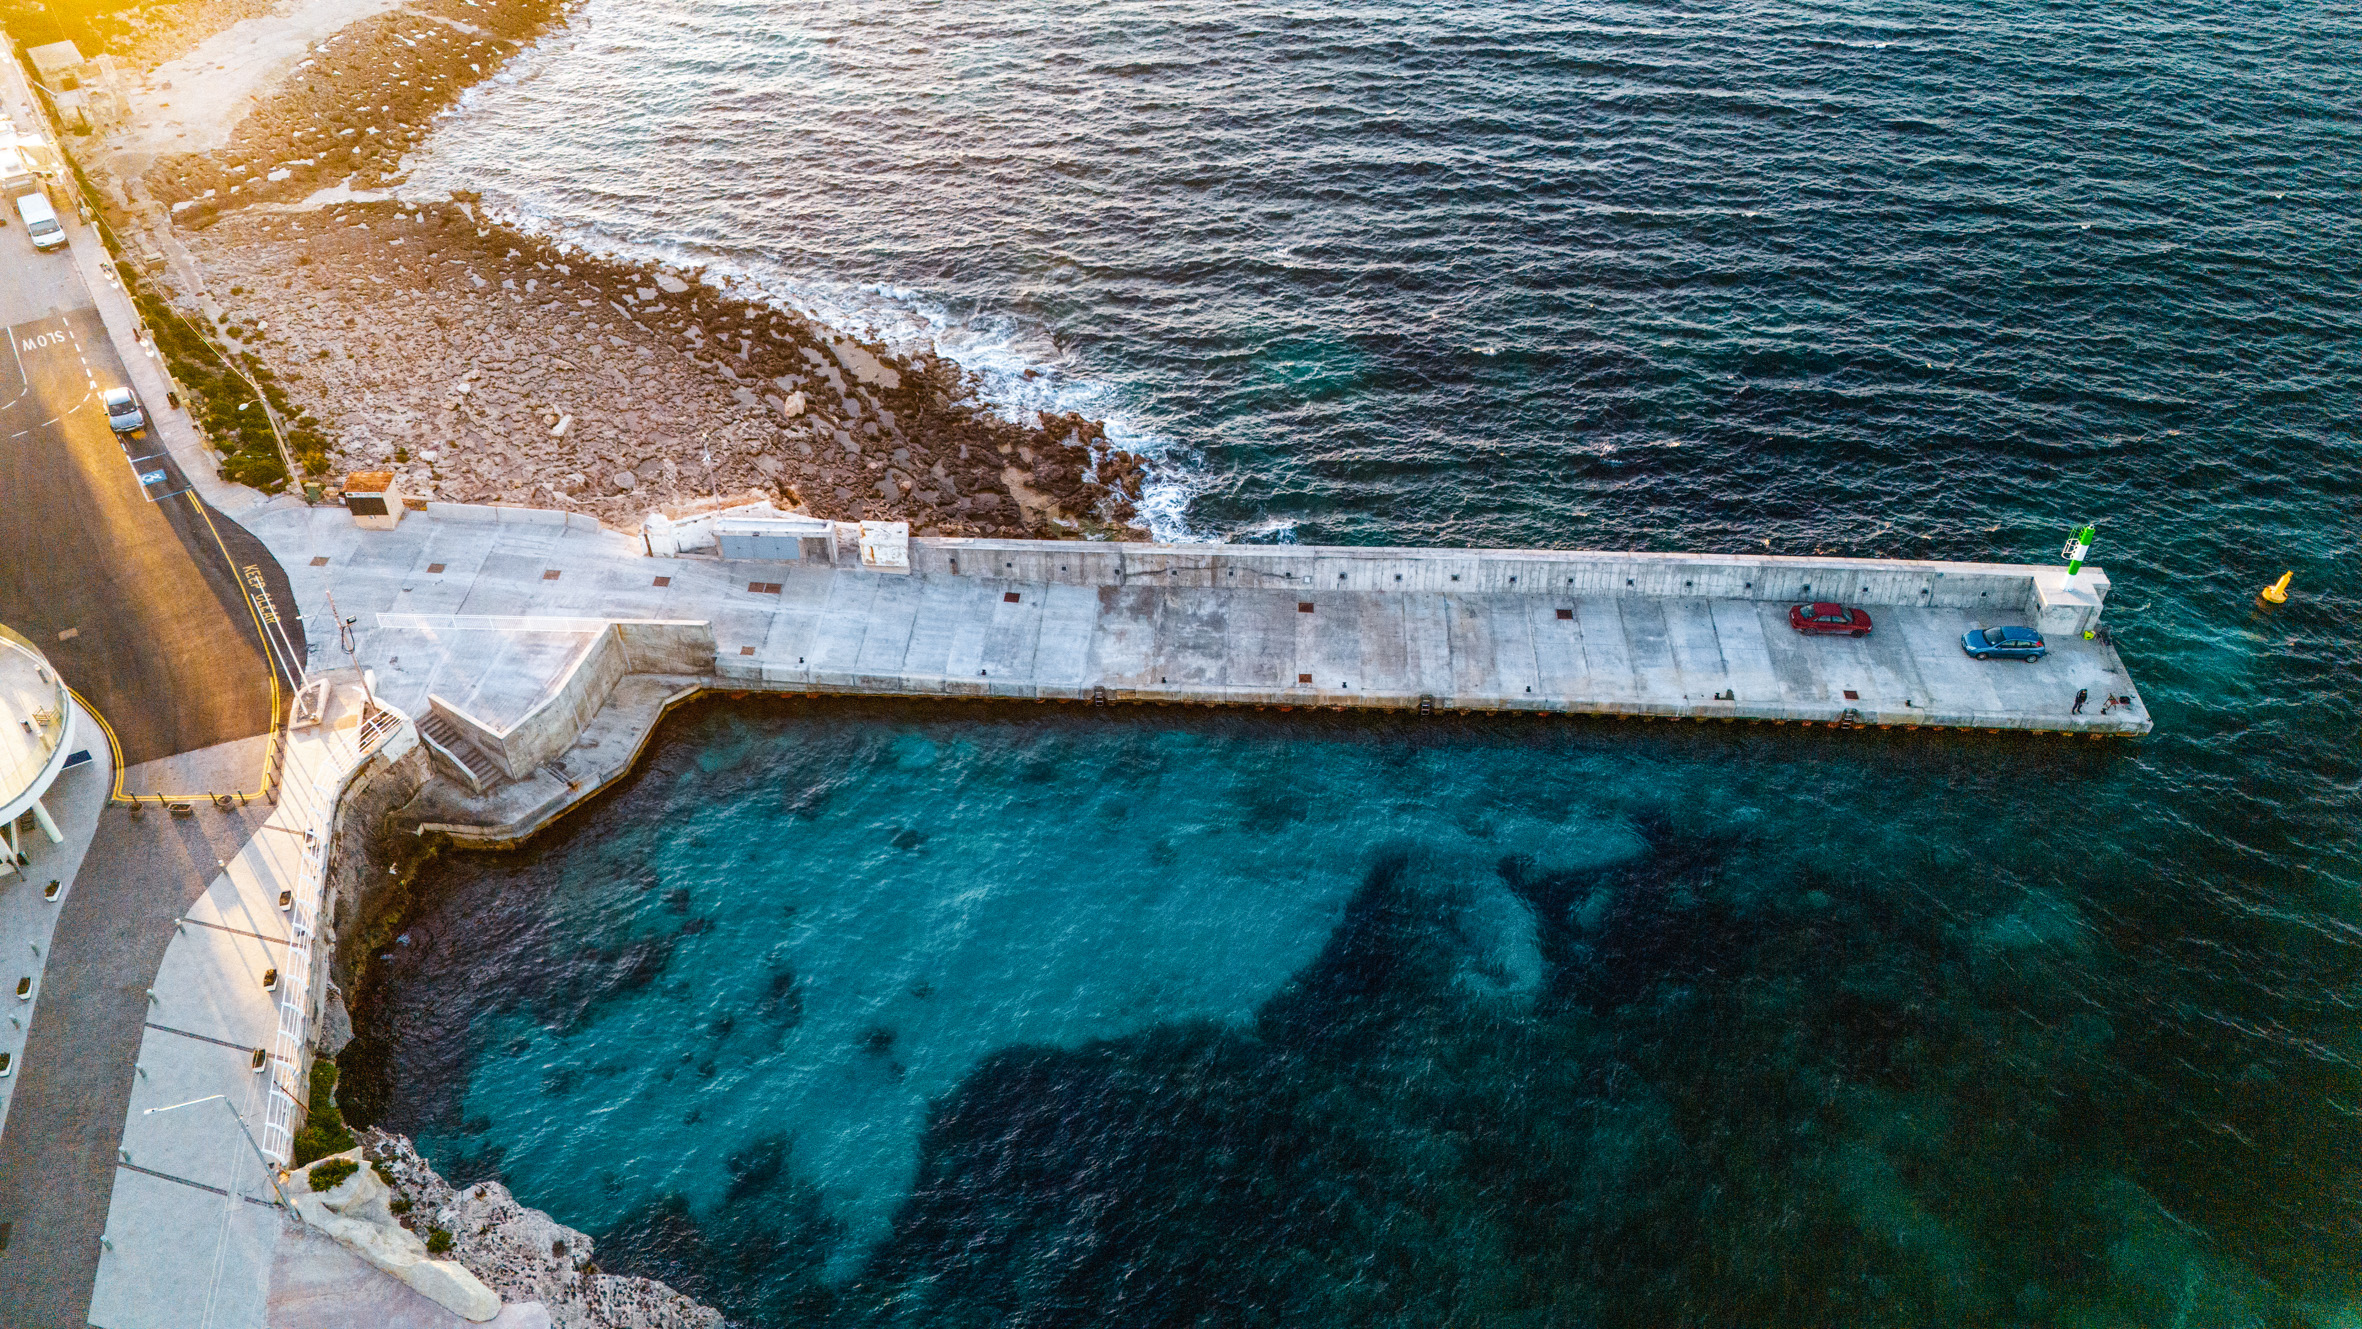 Infrastructure Malta restored and reinforced the Marfa breakwater